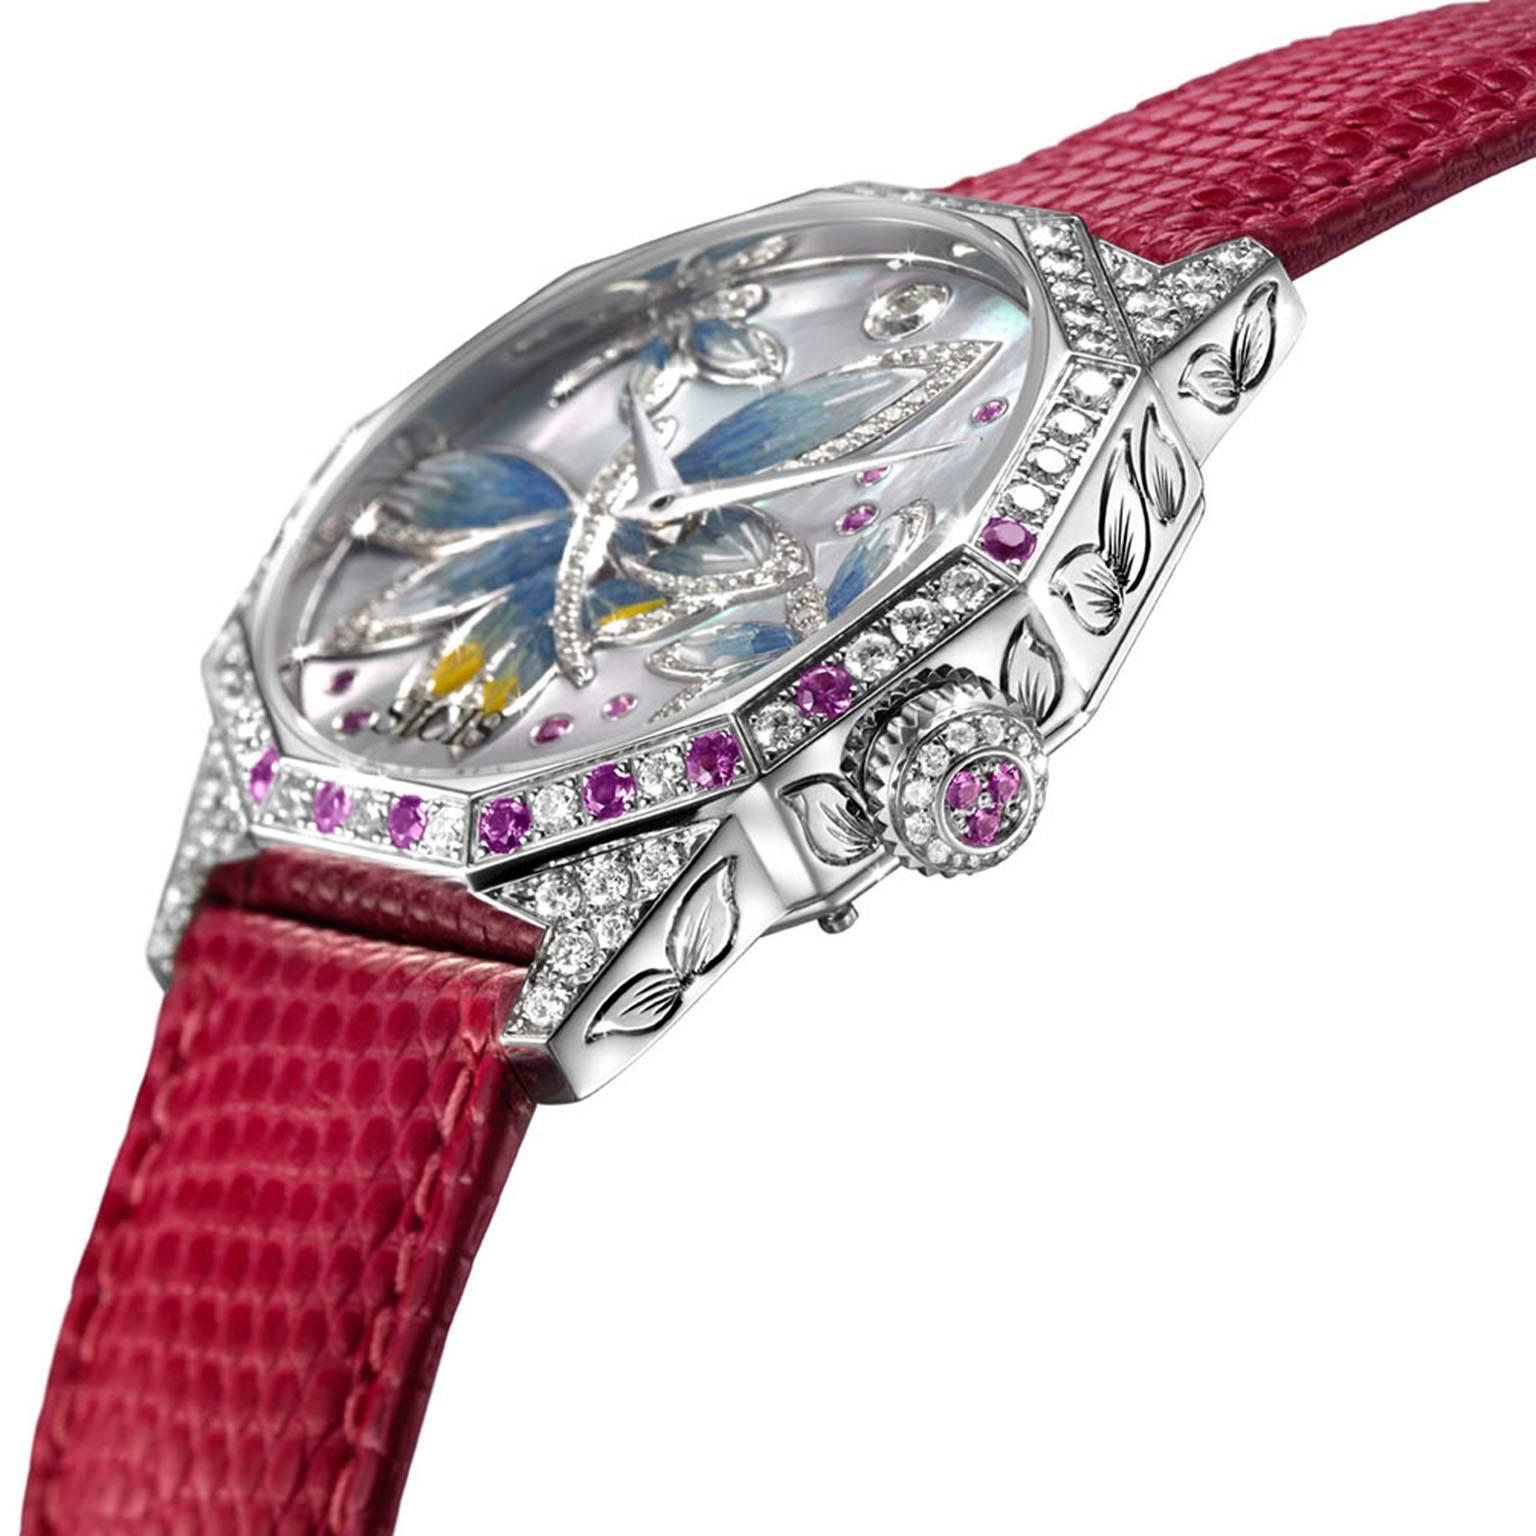 Micromosaic watch with diamonds, pink sapphires, Swiss Made, Automatic Movement. Alligator strap.

Gold Case (38 mm) 
Nano­Mosaic ­ 
Sapphire Glass ­ 
Automatic Movement (Swiss Made)
White Gold 750‰ 
White Diamonds 
Sapphire 
Mother of Pearl